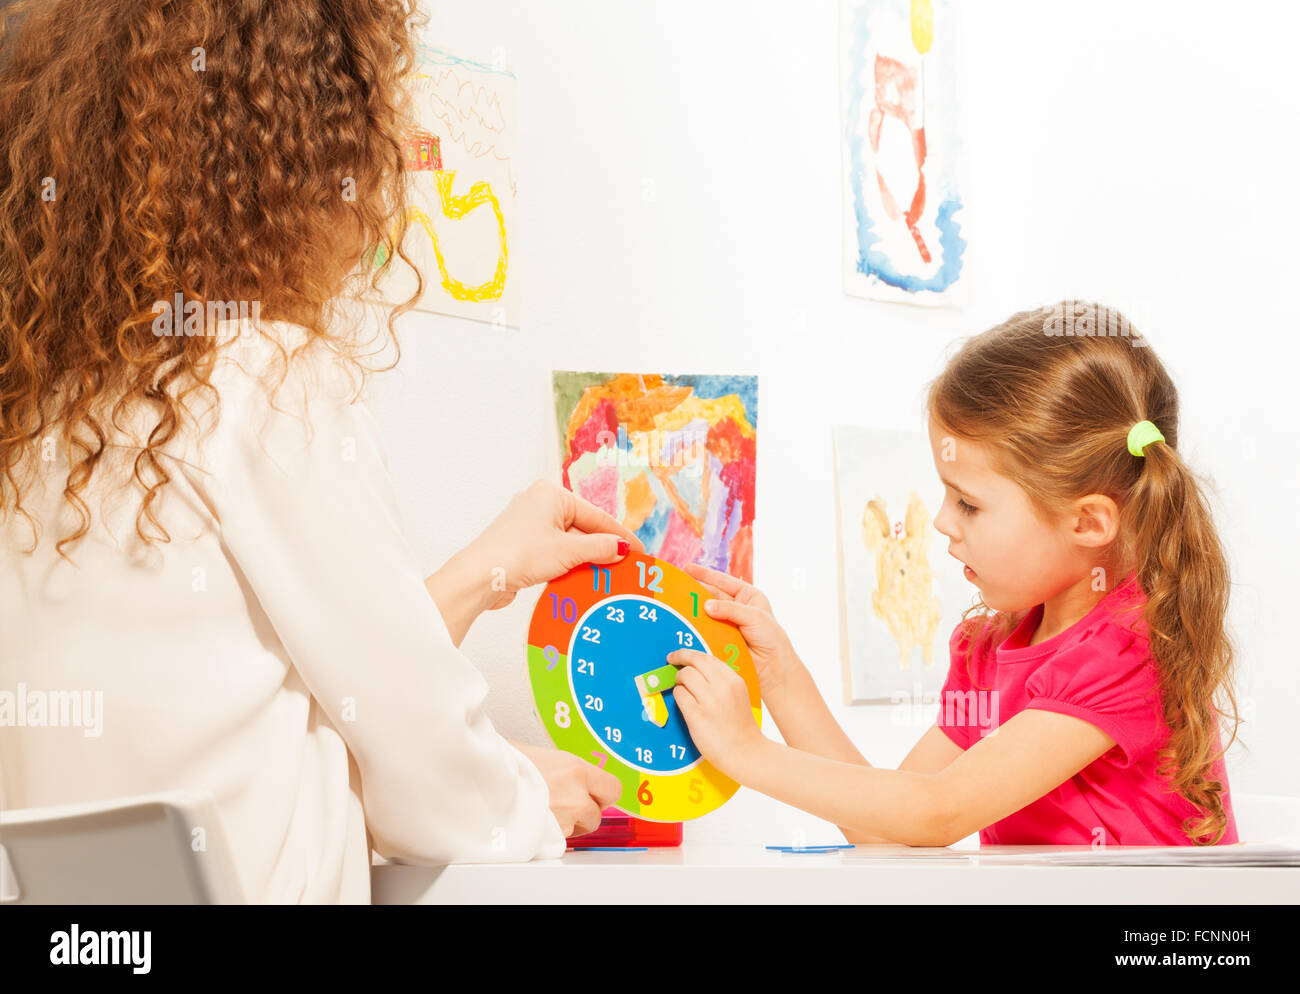 Girl moving pointers at the dial of clock model Stock Photo